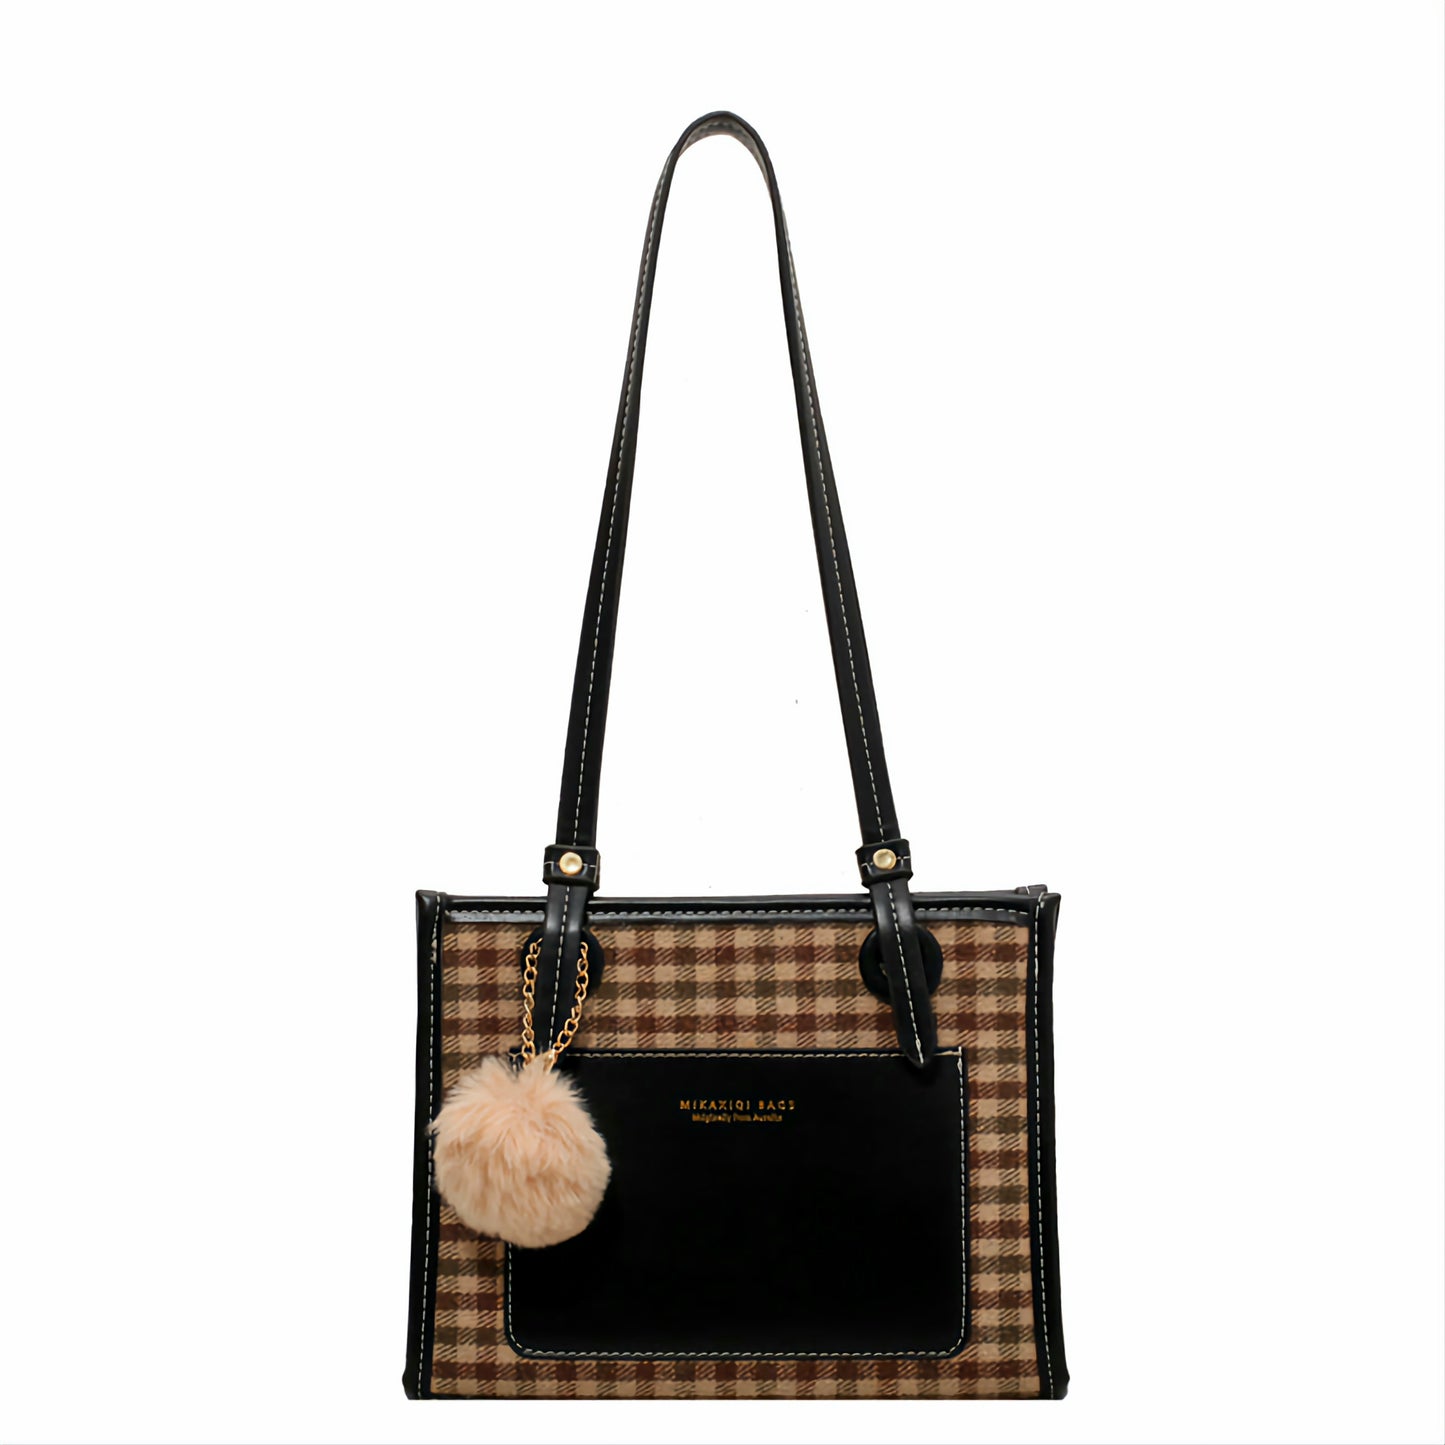 Luxurious PU leather crossbody bag with plaid pattern perfect gift for christmas thanksgiving black friday halloween all holiday ocassions at acheckbox